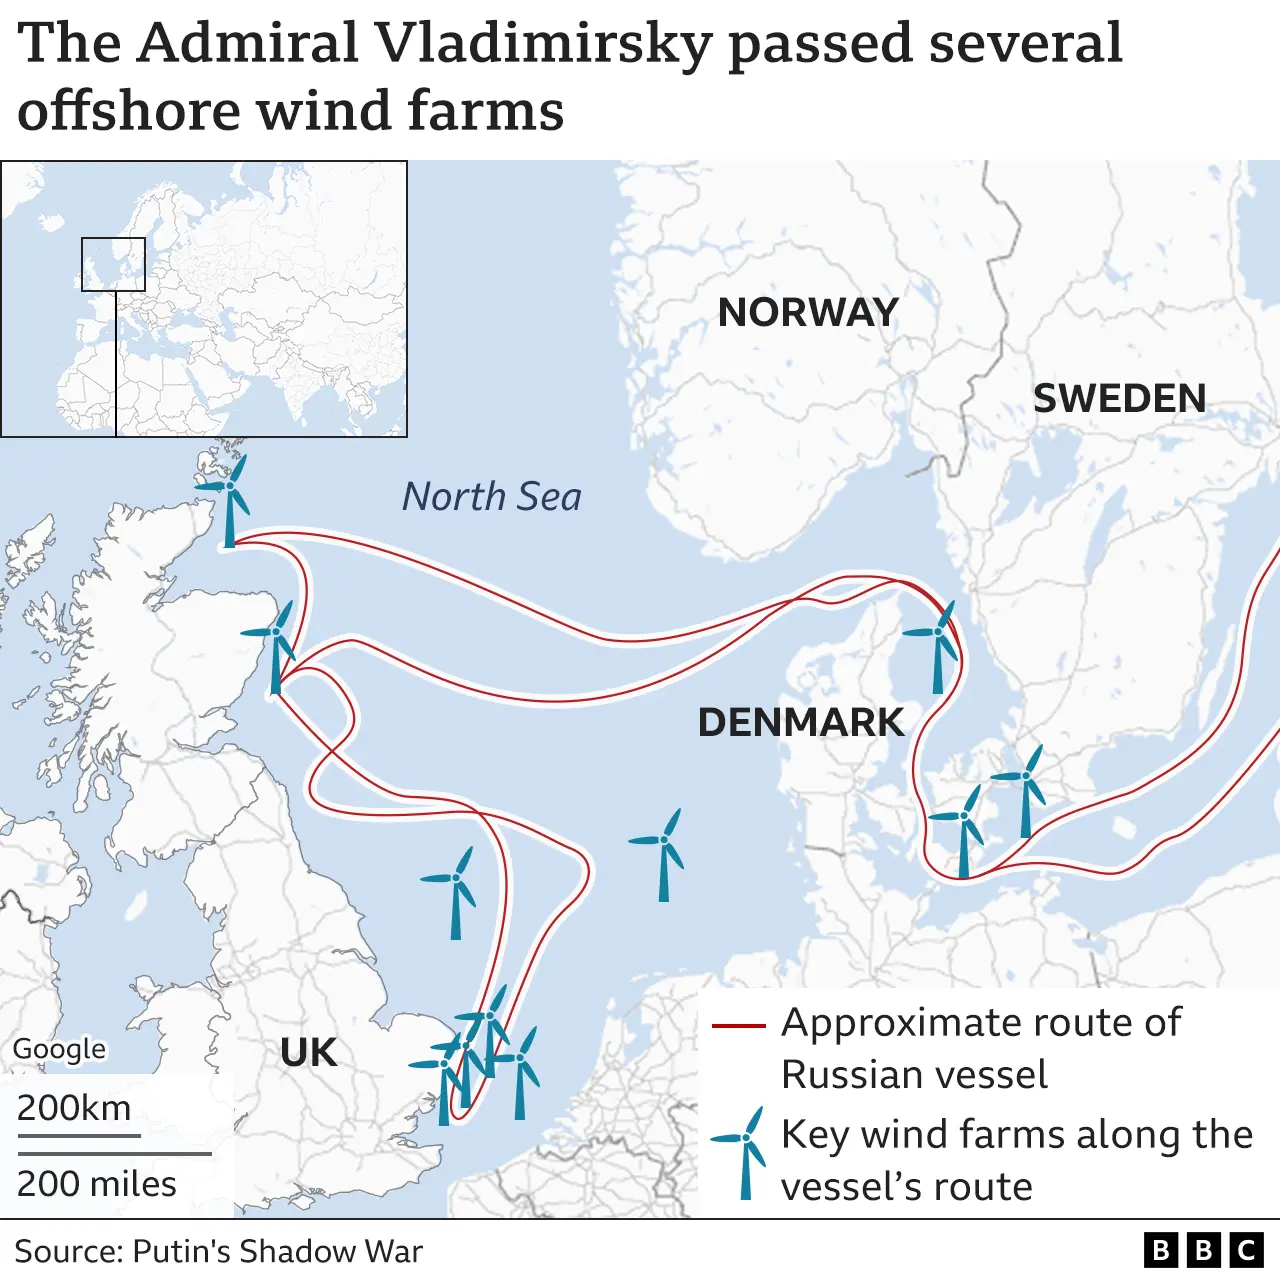 _129403428_the_admiral_vladimirsky_passed_several_offshore_windfarms_640-nc-2x-nc.png.webp